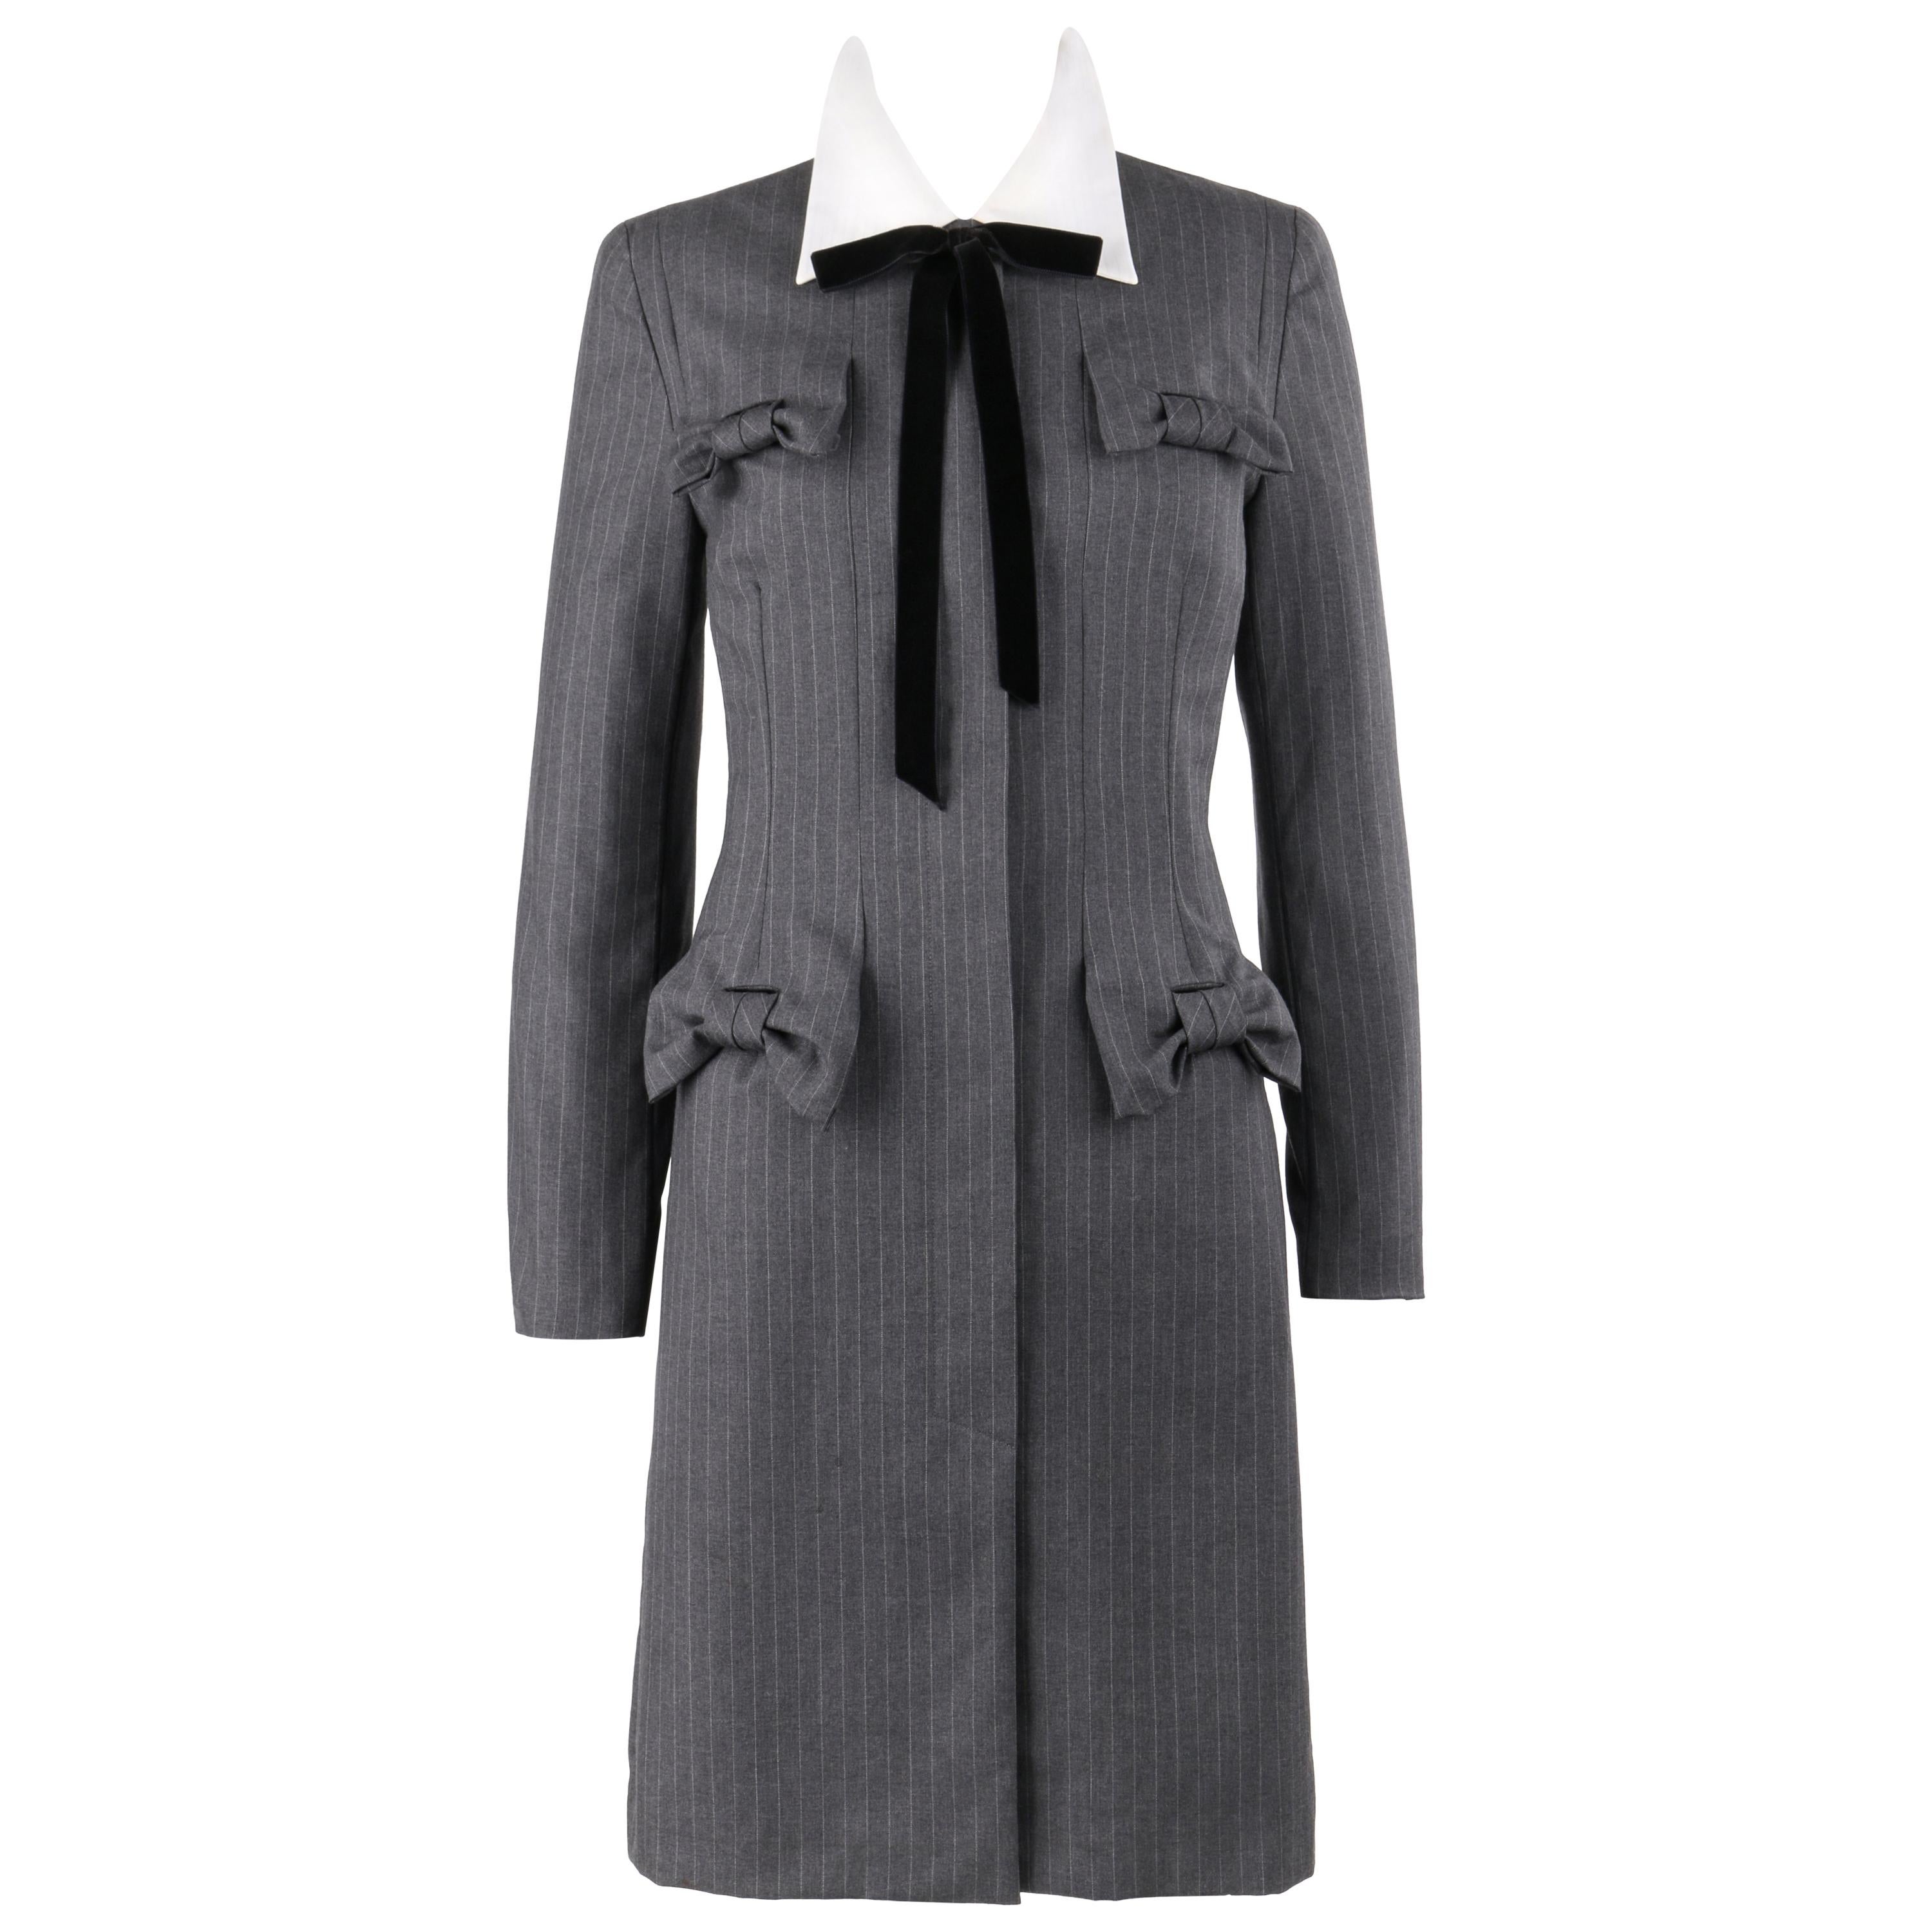 GIVENCHY Couture A/W 1996 JOHN GALLIANO Charcoal Gray Wool Bow Shirt Coat Dress